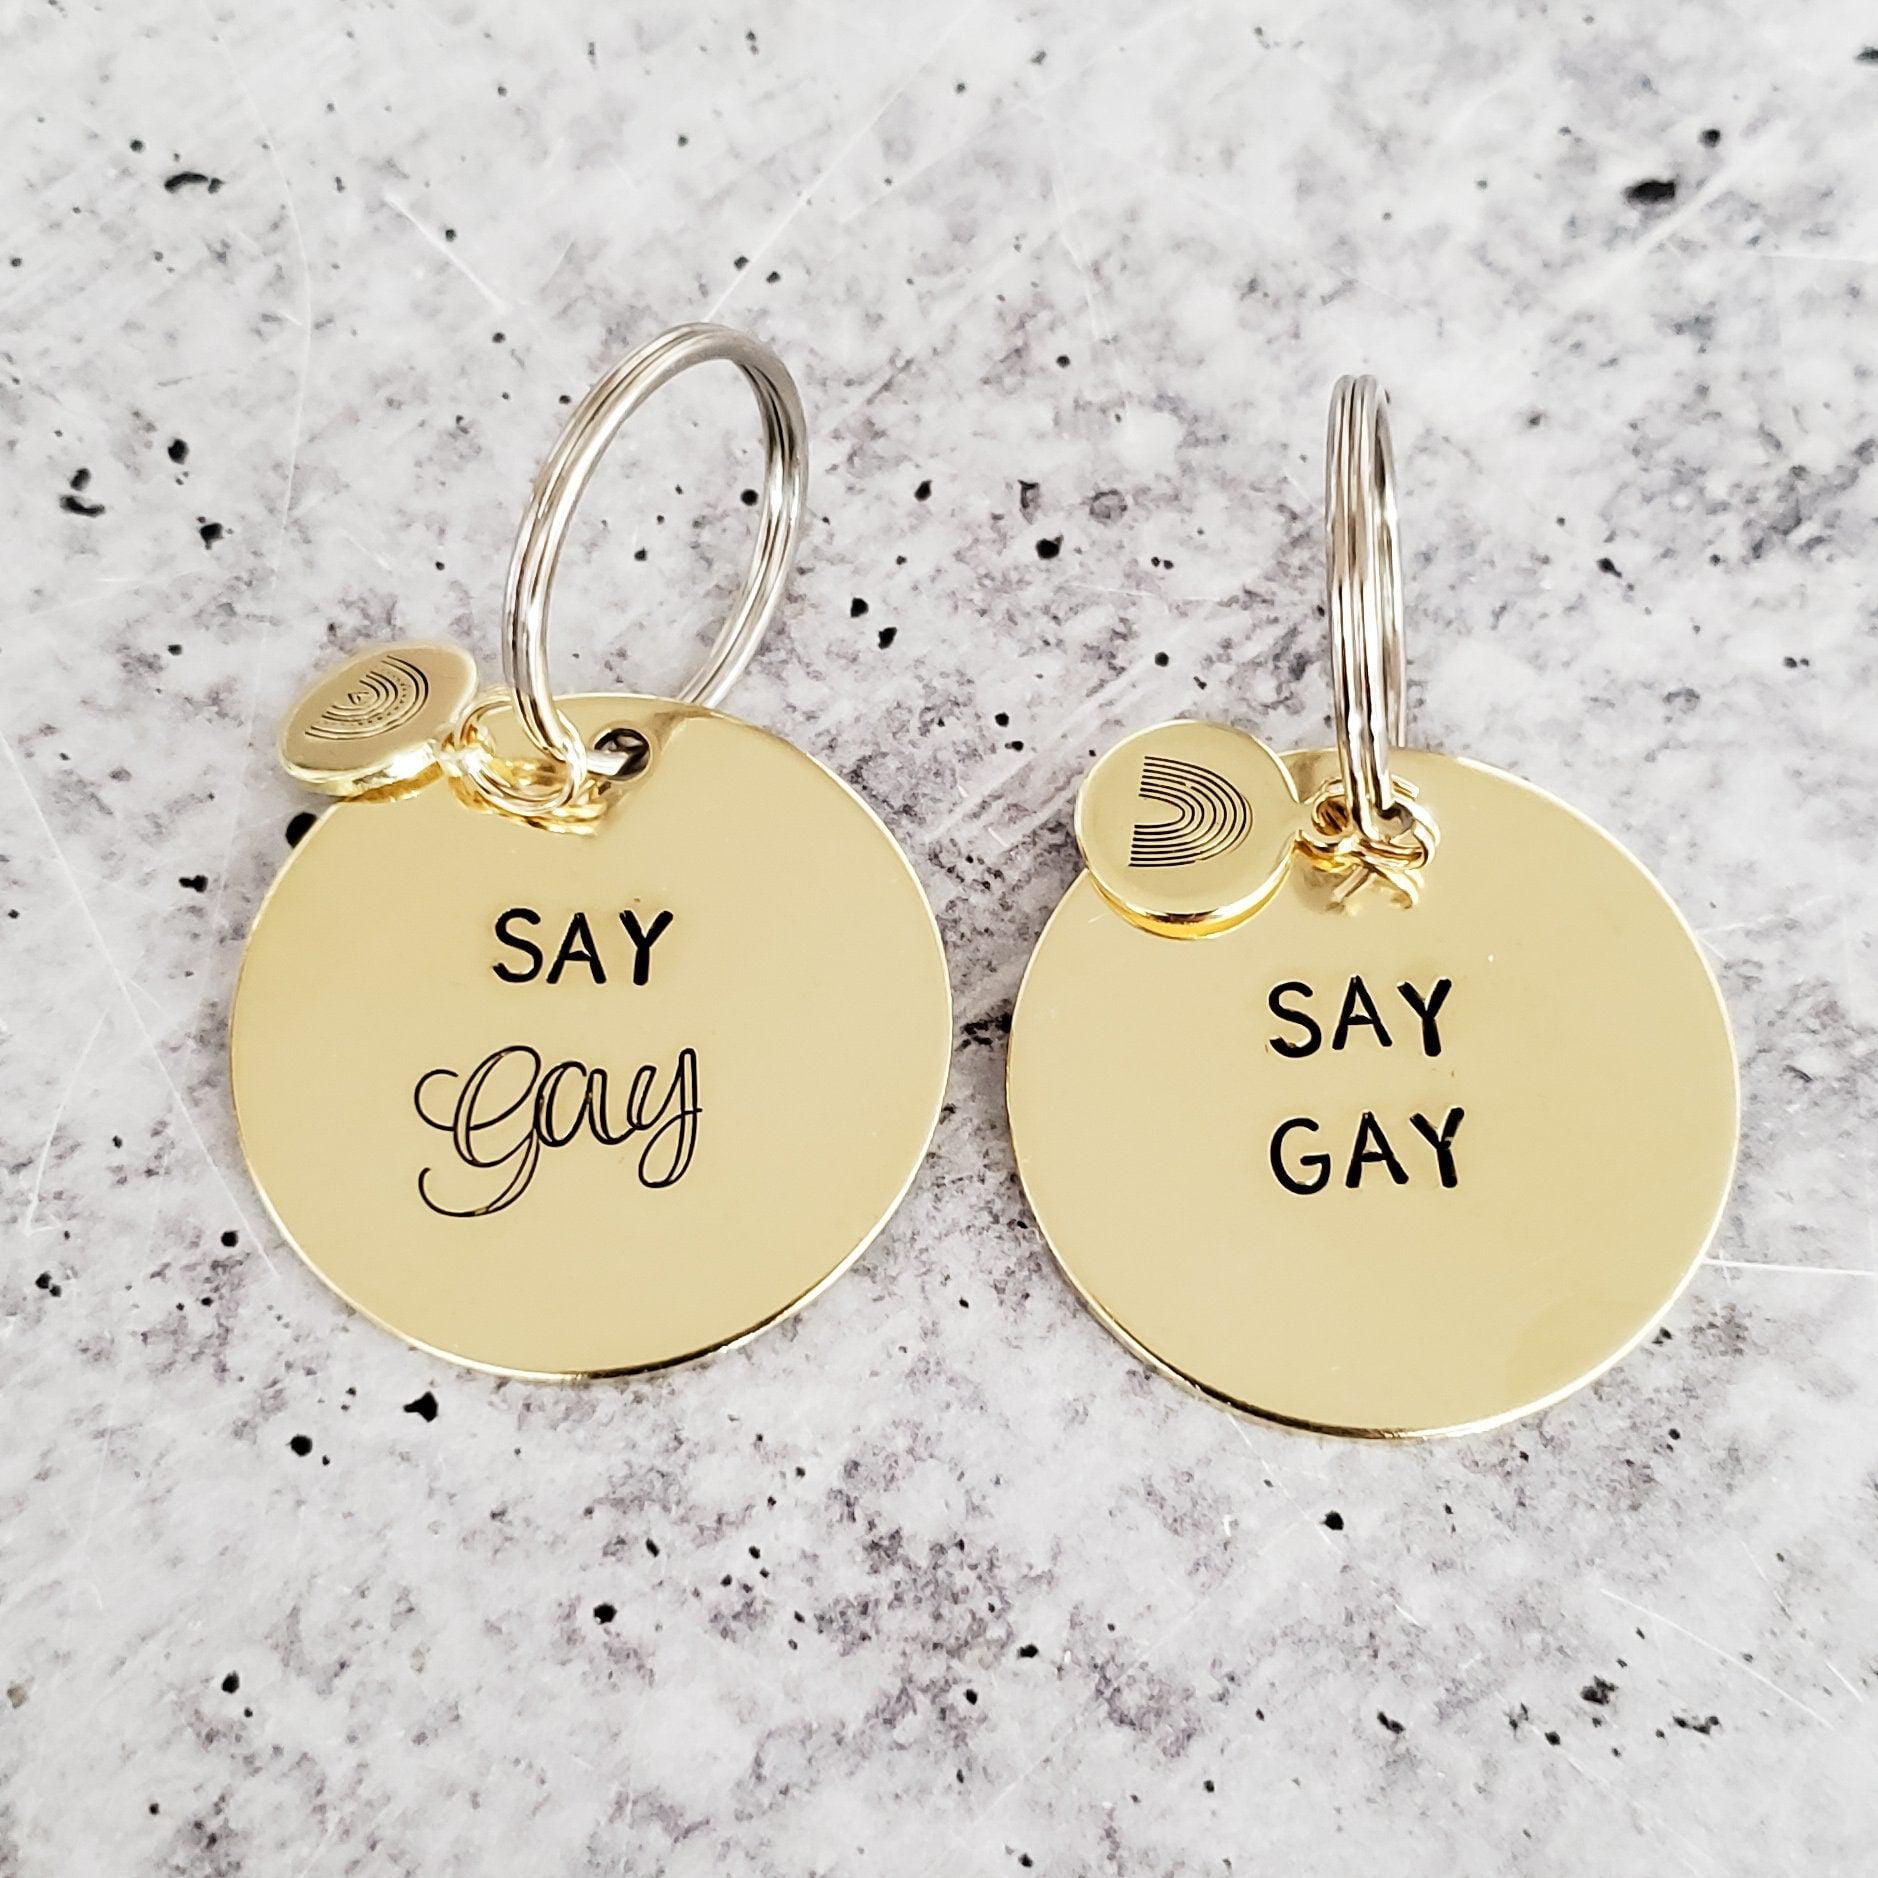 SAY GAY Political Keychain - Freedom of Speech Pride Gift for Gay Friend - Ally Keychain for LGBTQIA Rights - Queer Bag Accessory for Them